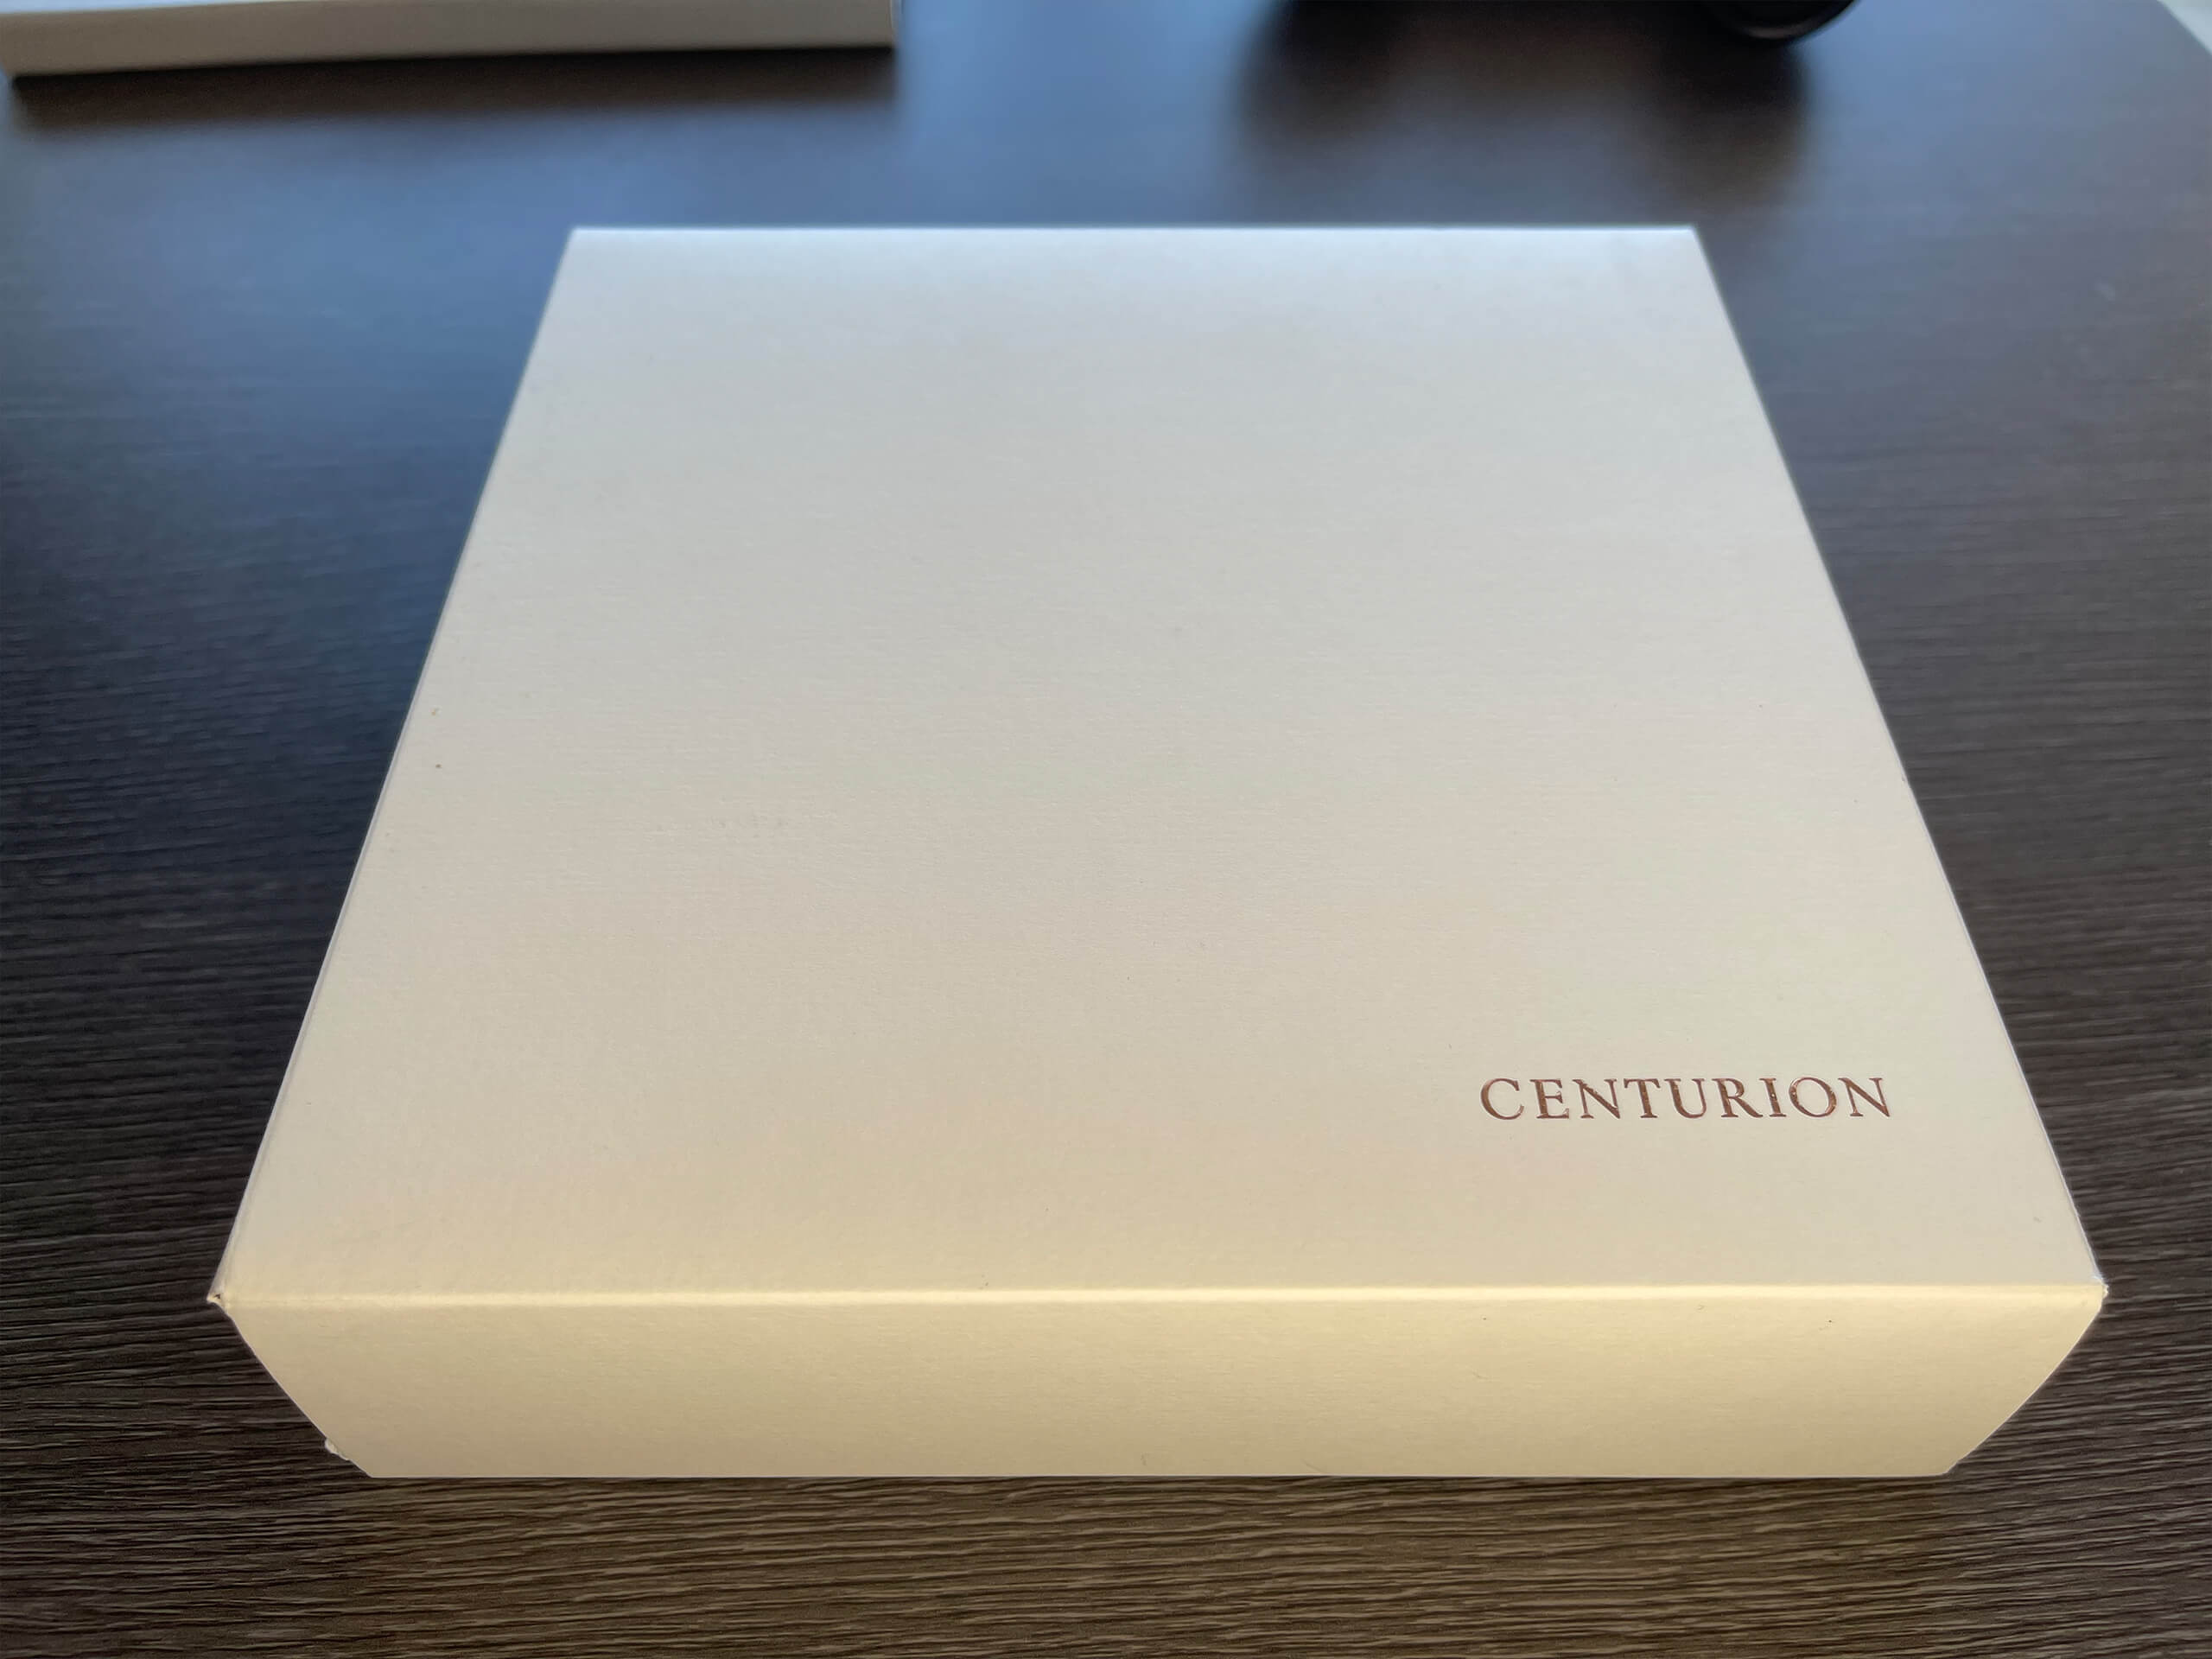 American Express Centurion Card - Unboxing